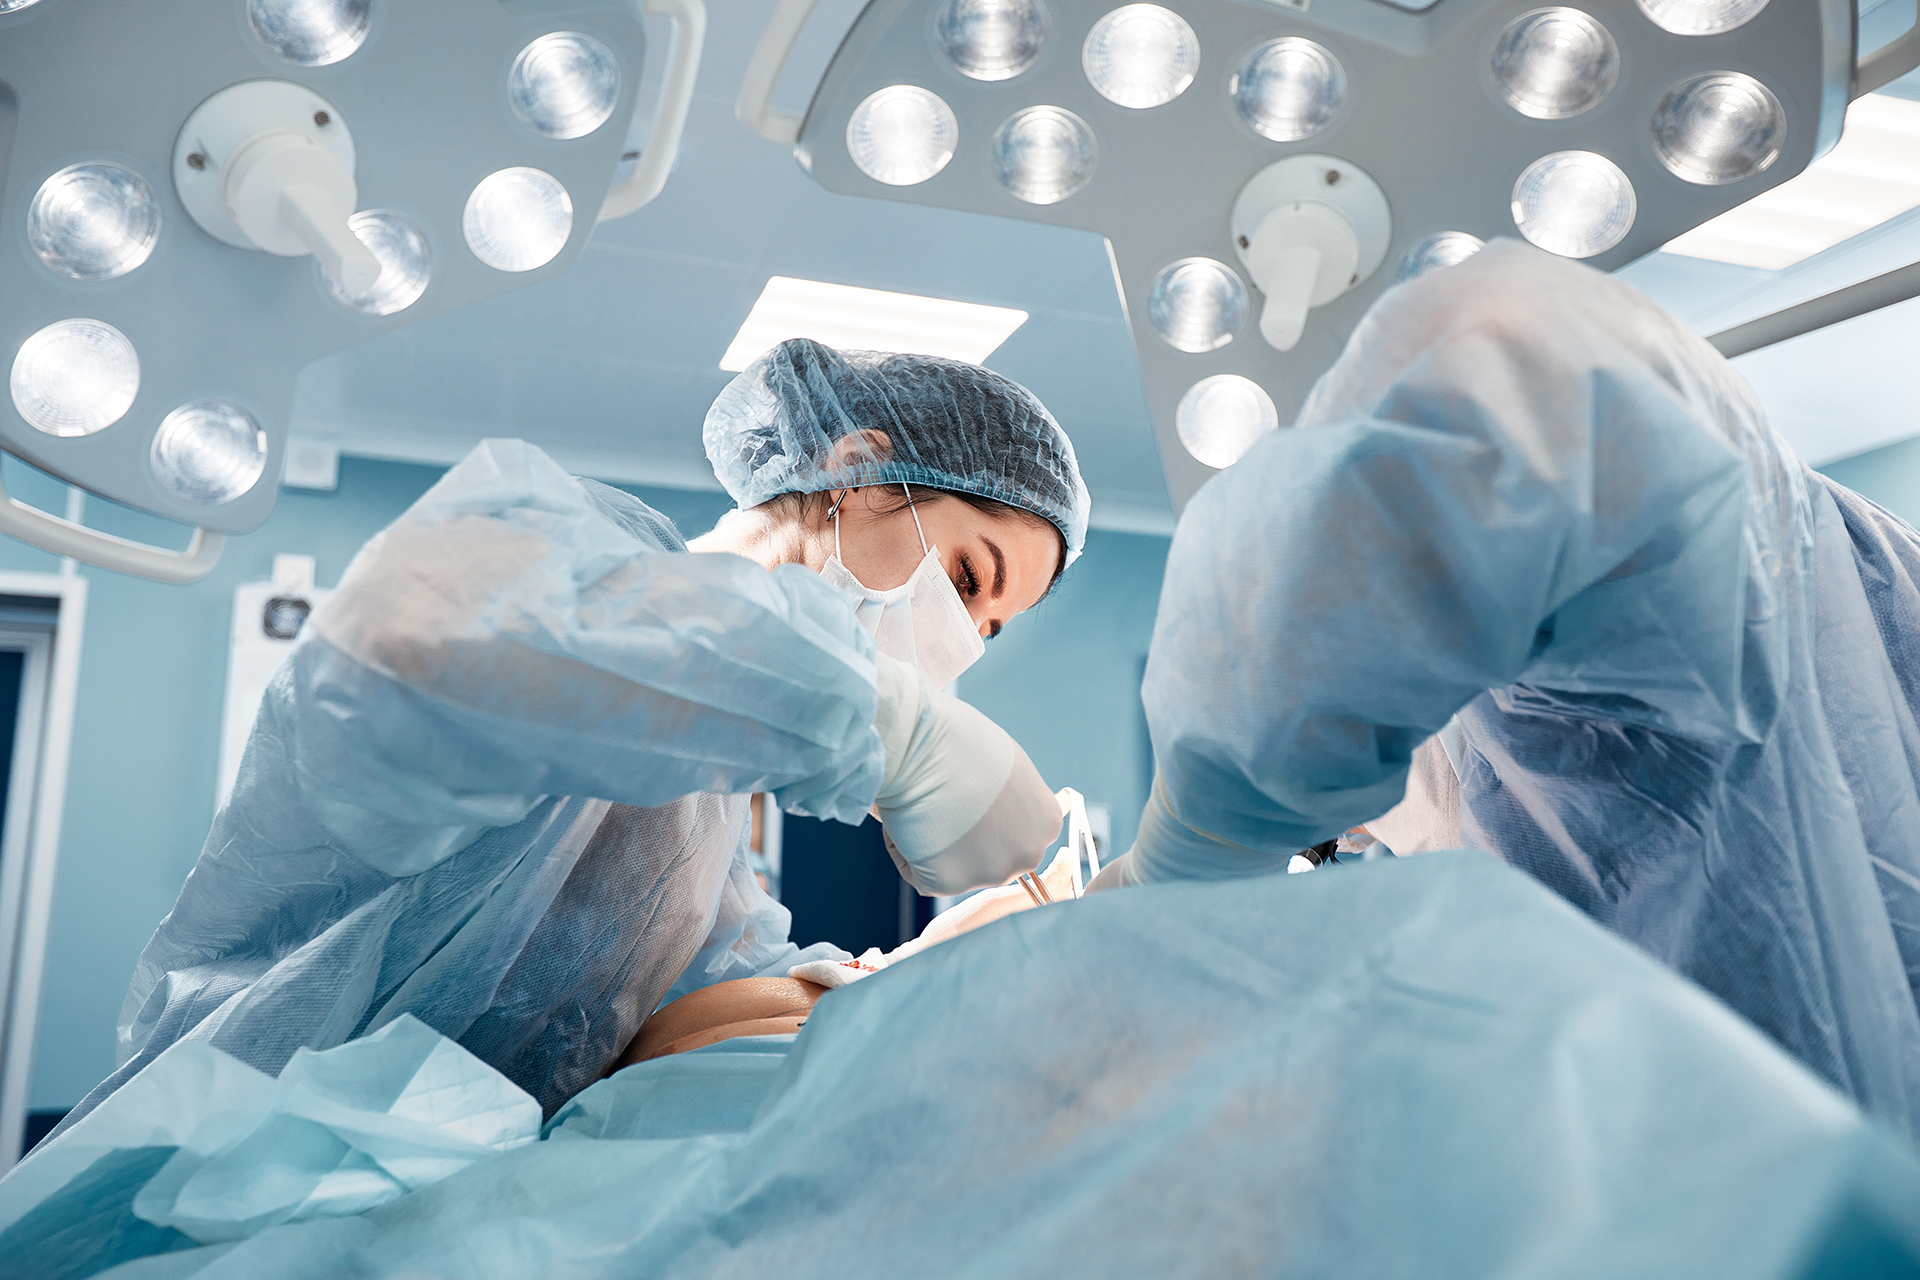 Surgeons in the operating room with face covering